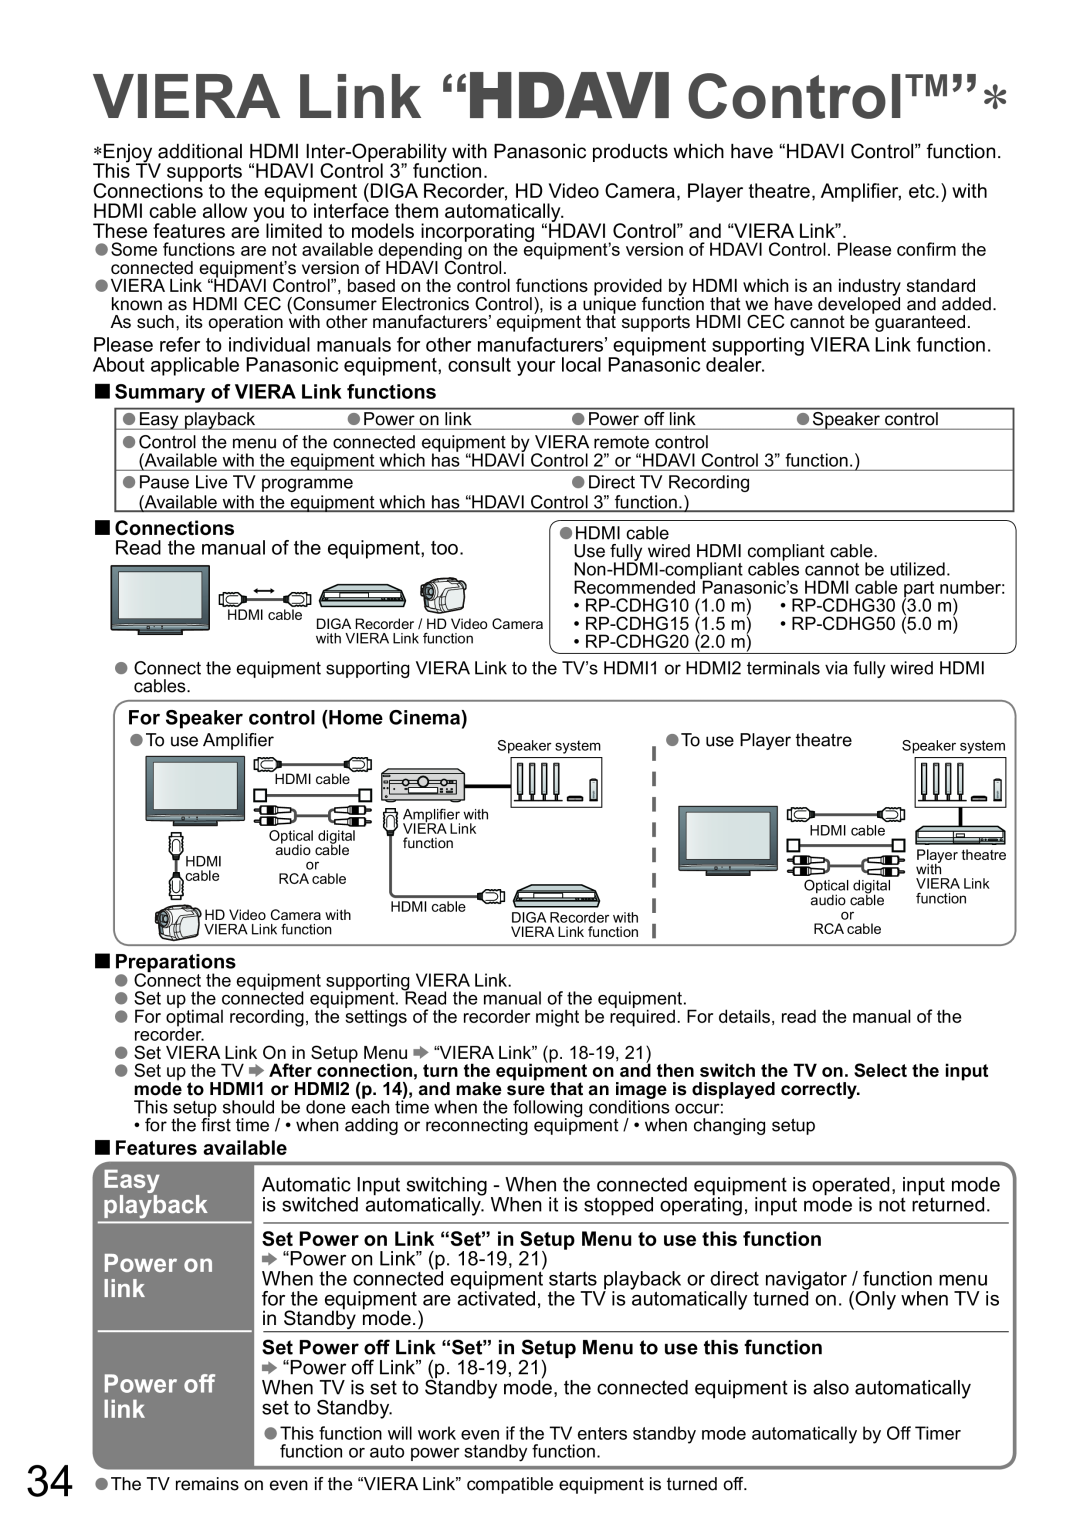 Panasonic TX-32LXD8A VIERA Link “ ControlTM”, Power on link Power off link, Easy playback, Summary of VIERA Link functions 